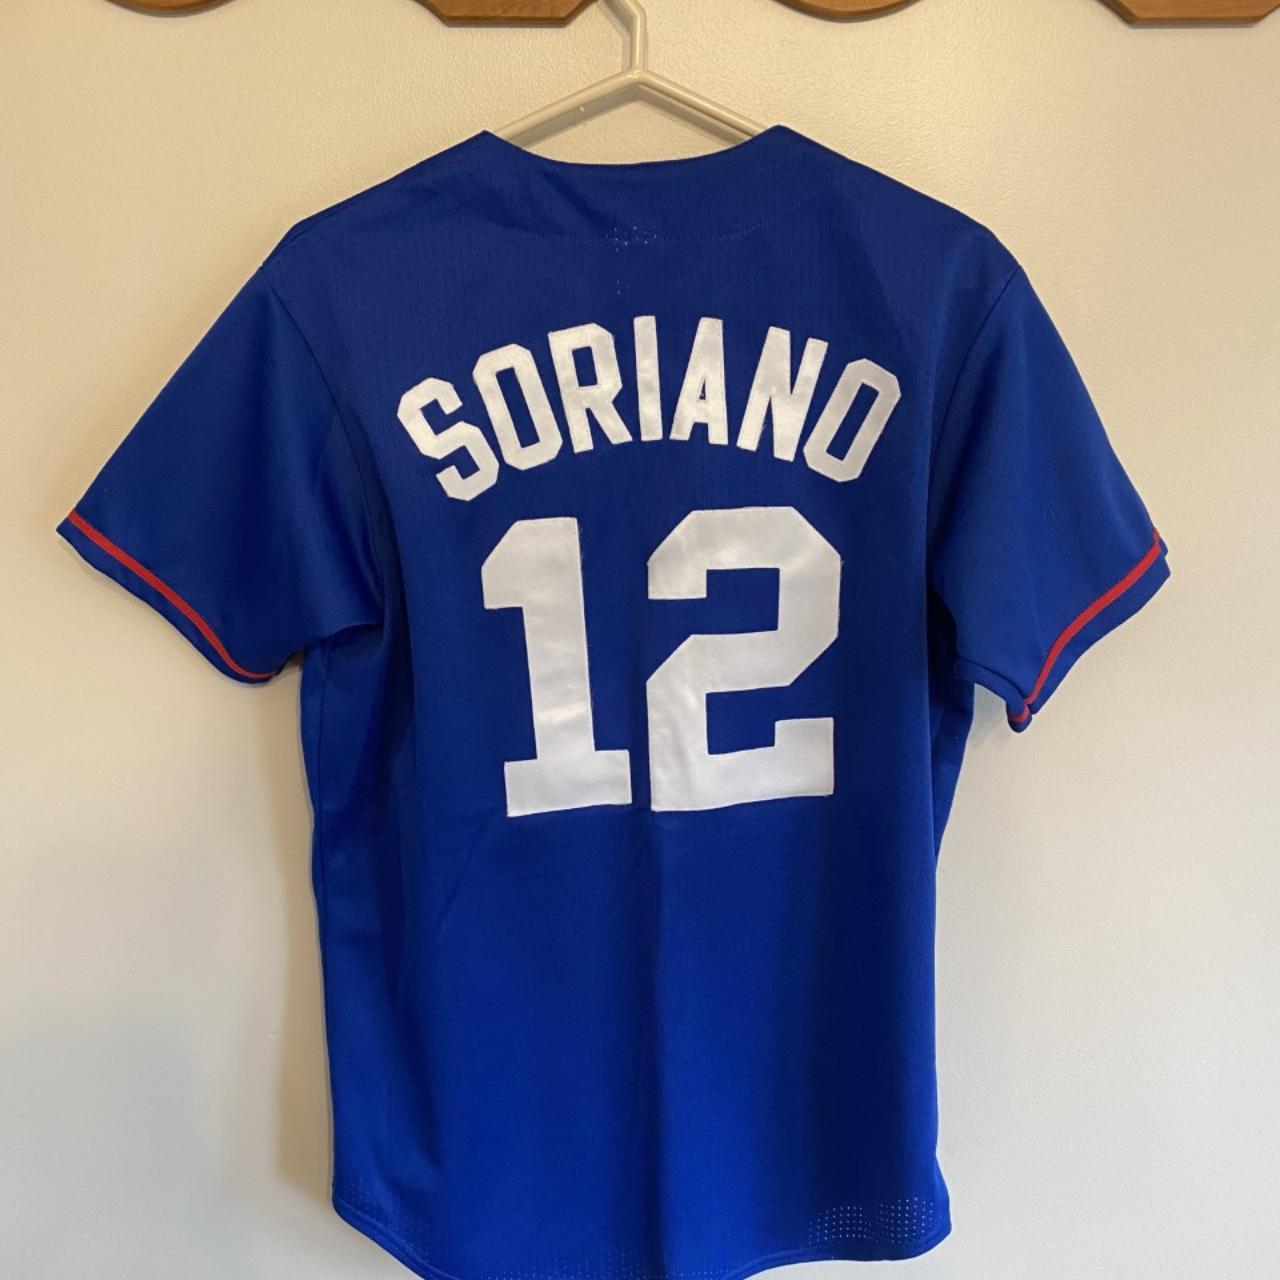 Alfonso Soriano Blue MLB Jerseys for sale